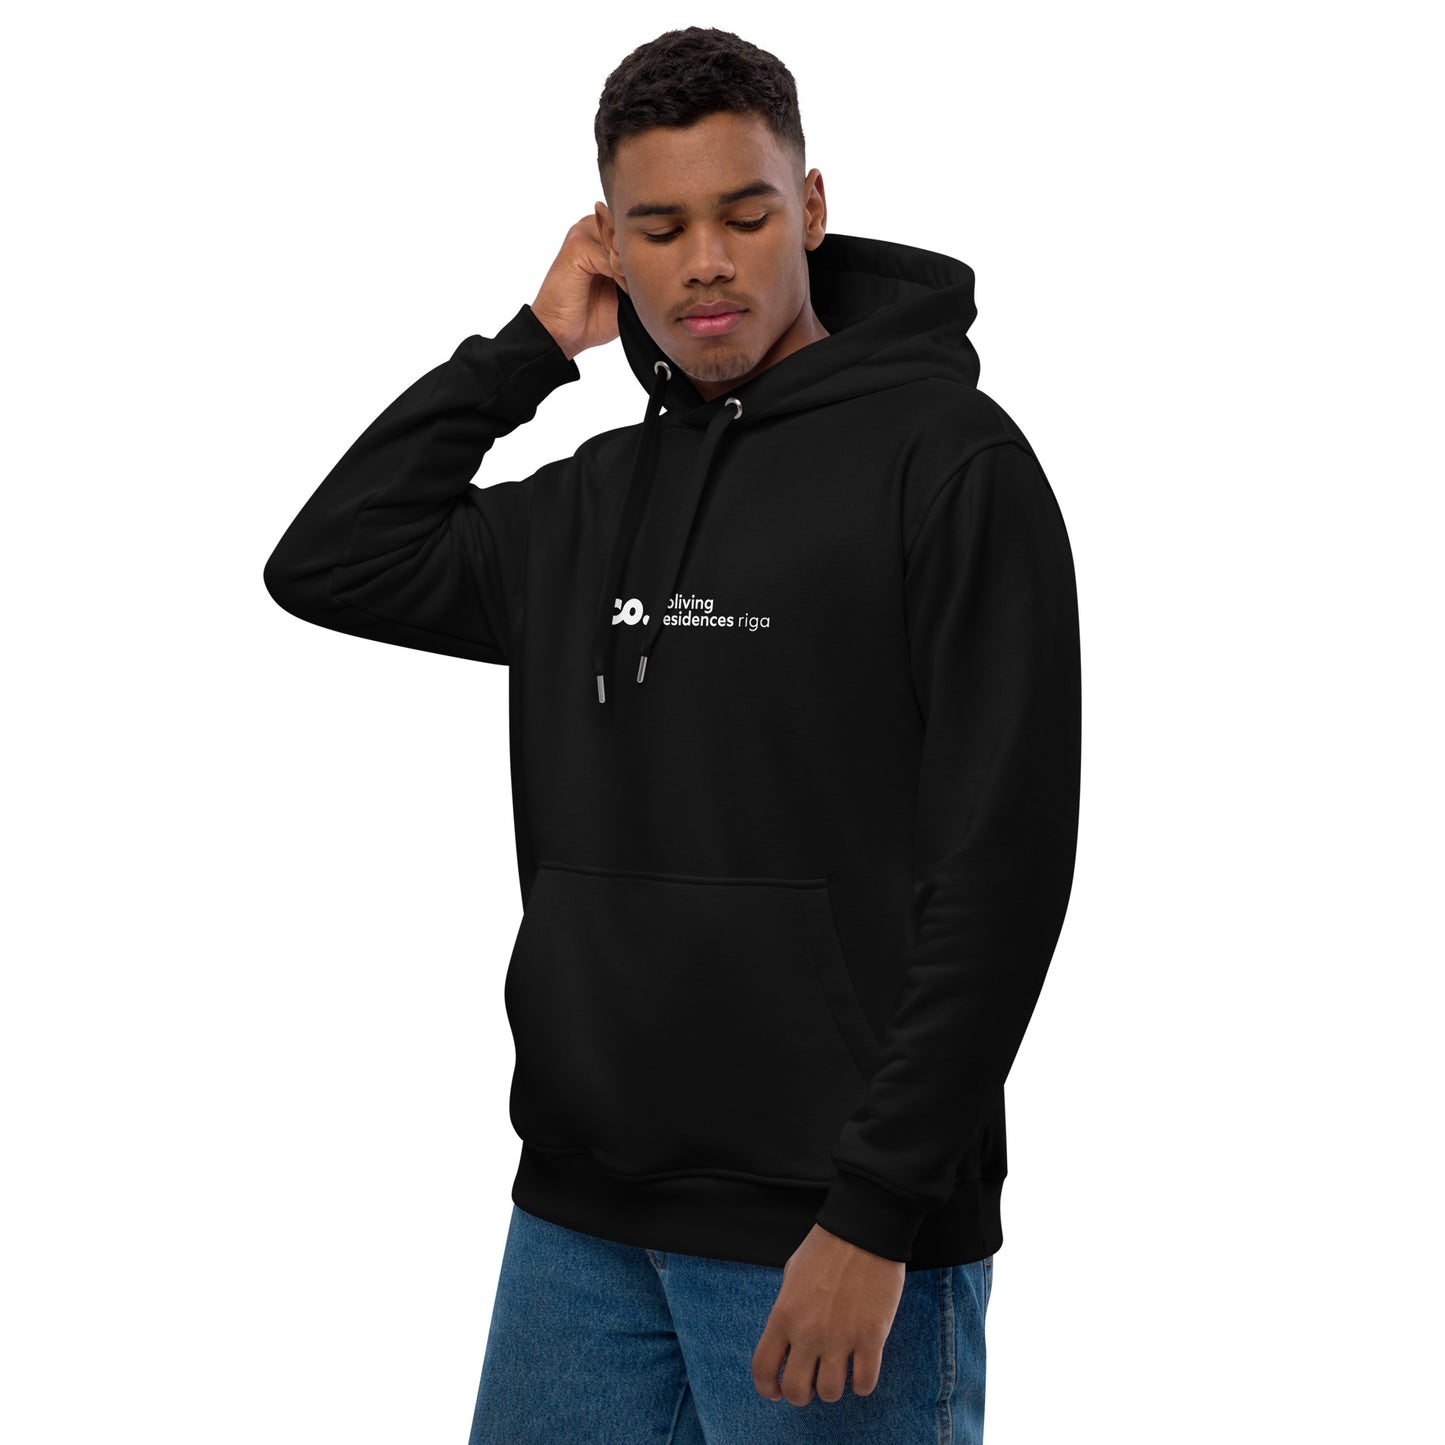 front view of a black man wearing a black hoodie with the Coliving Residences Riga logo